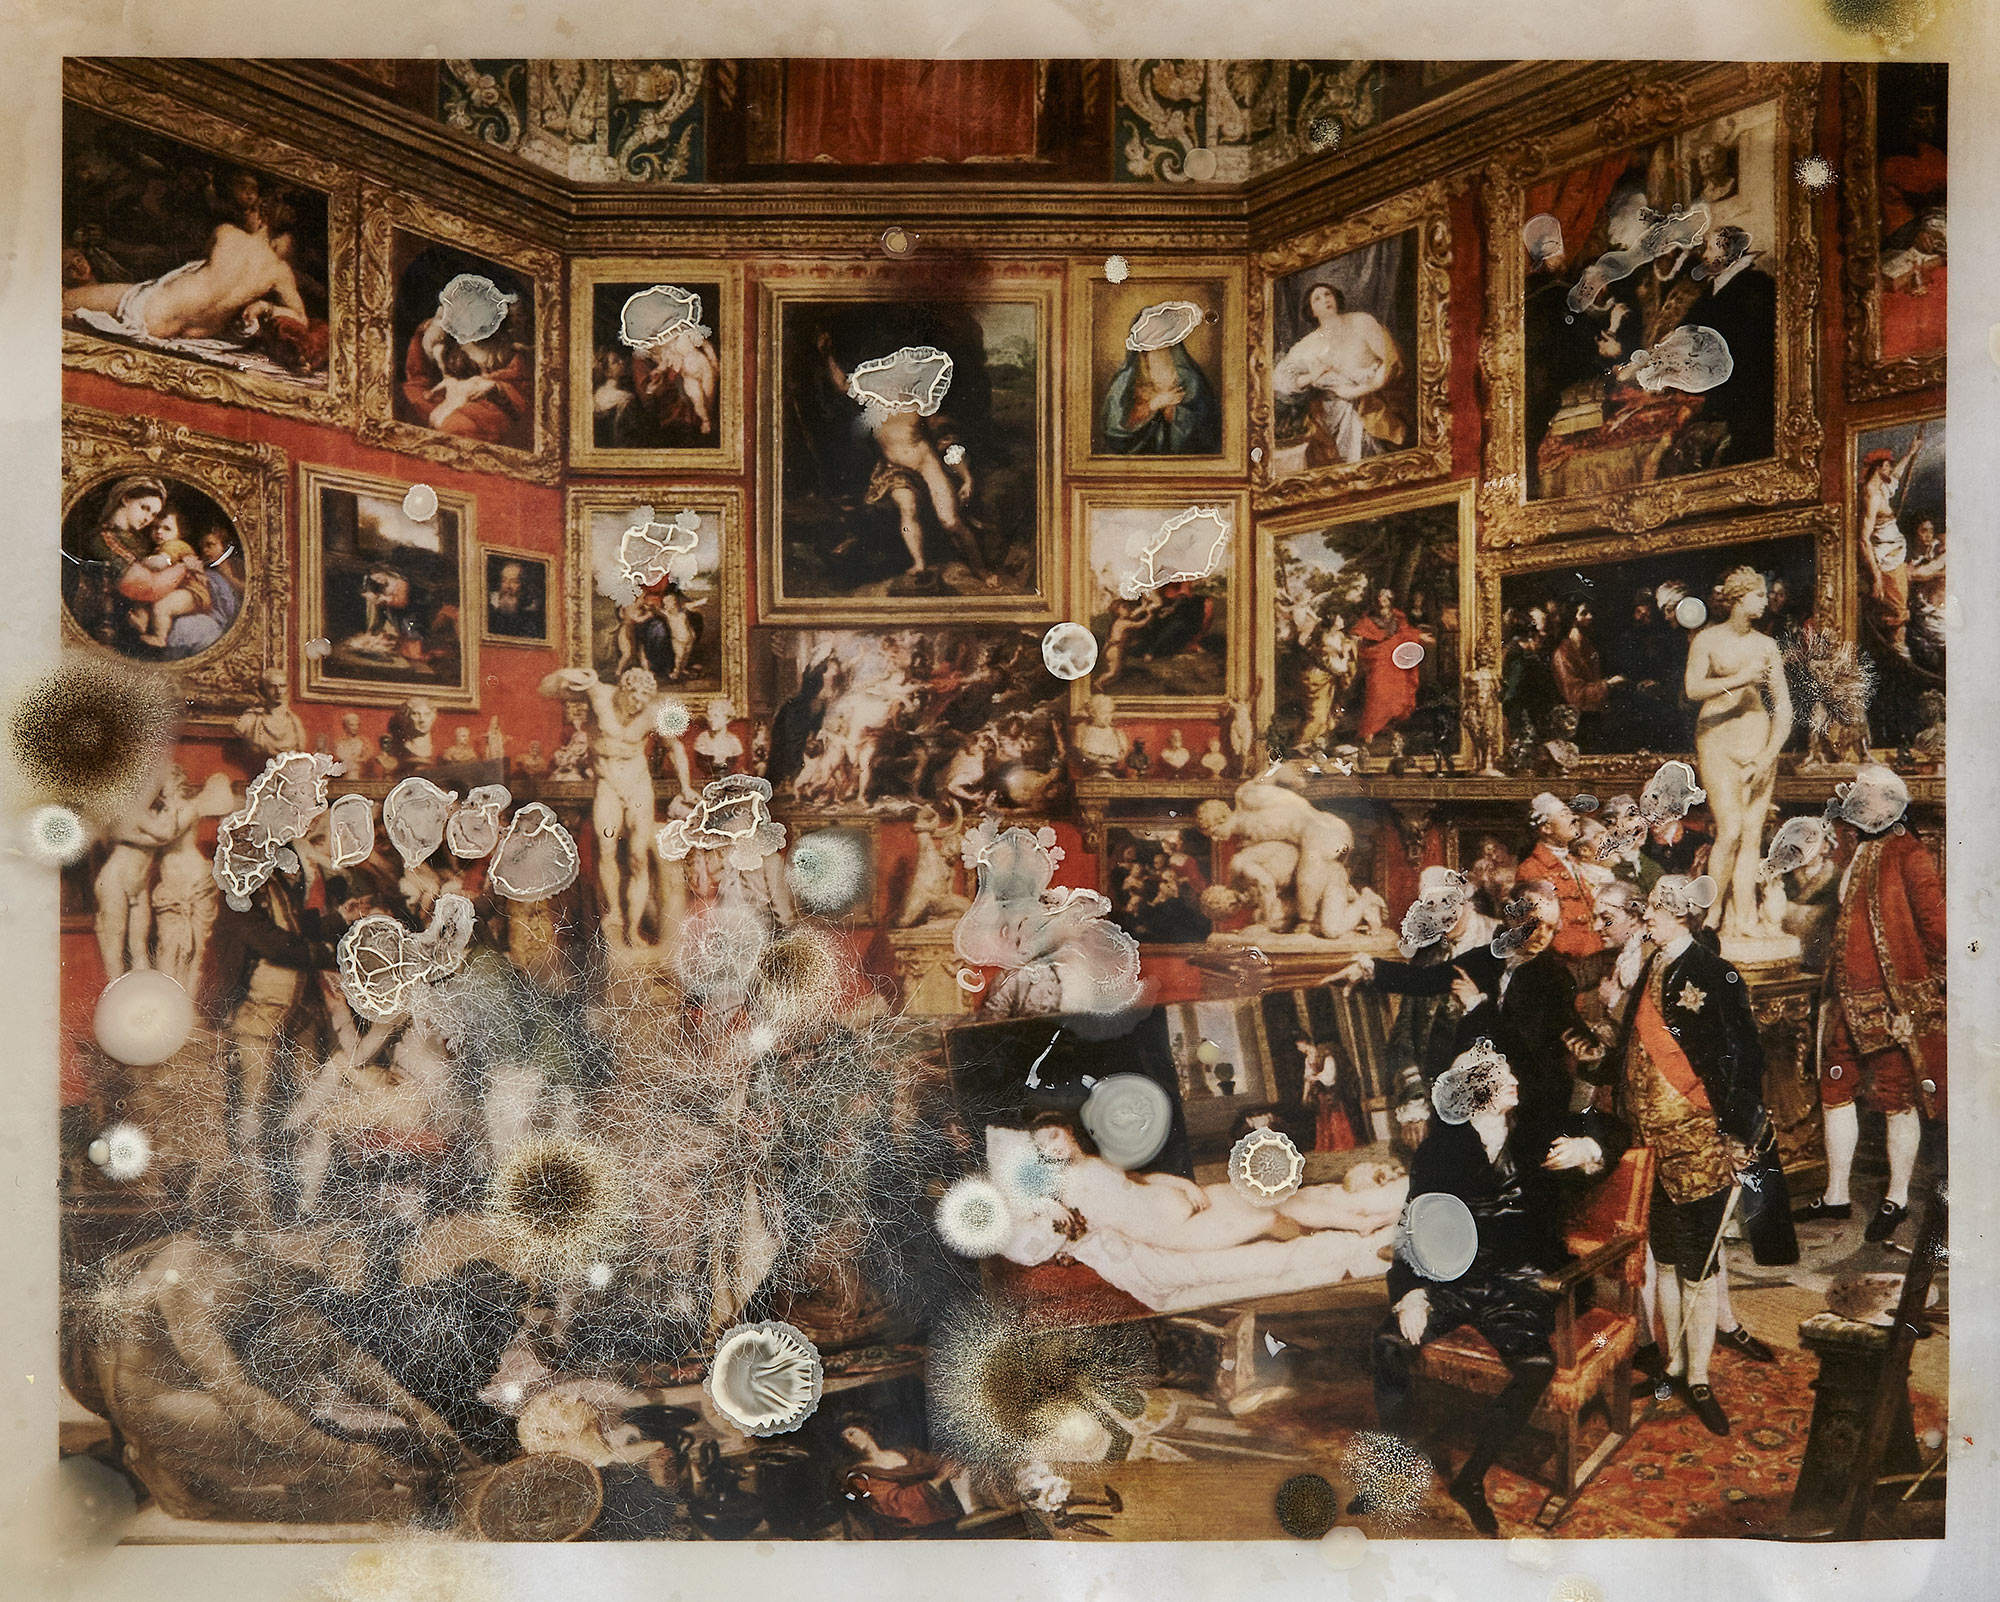 A damaged photograph of a room with walls covered in portraits of women